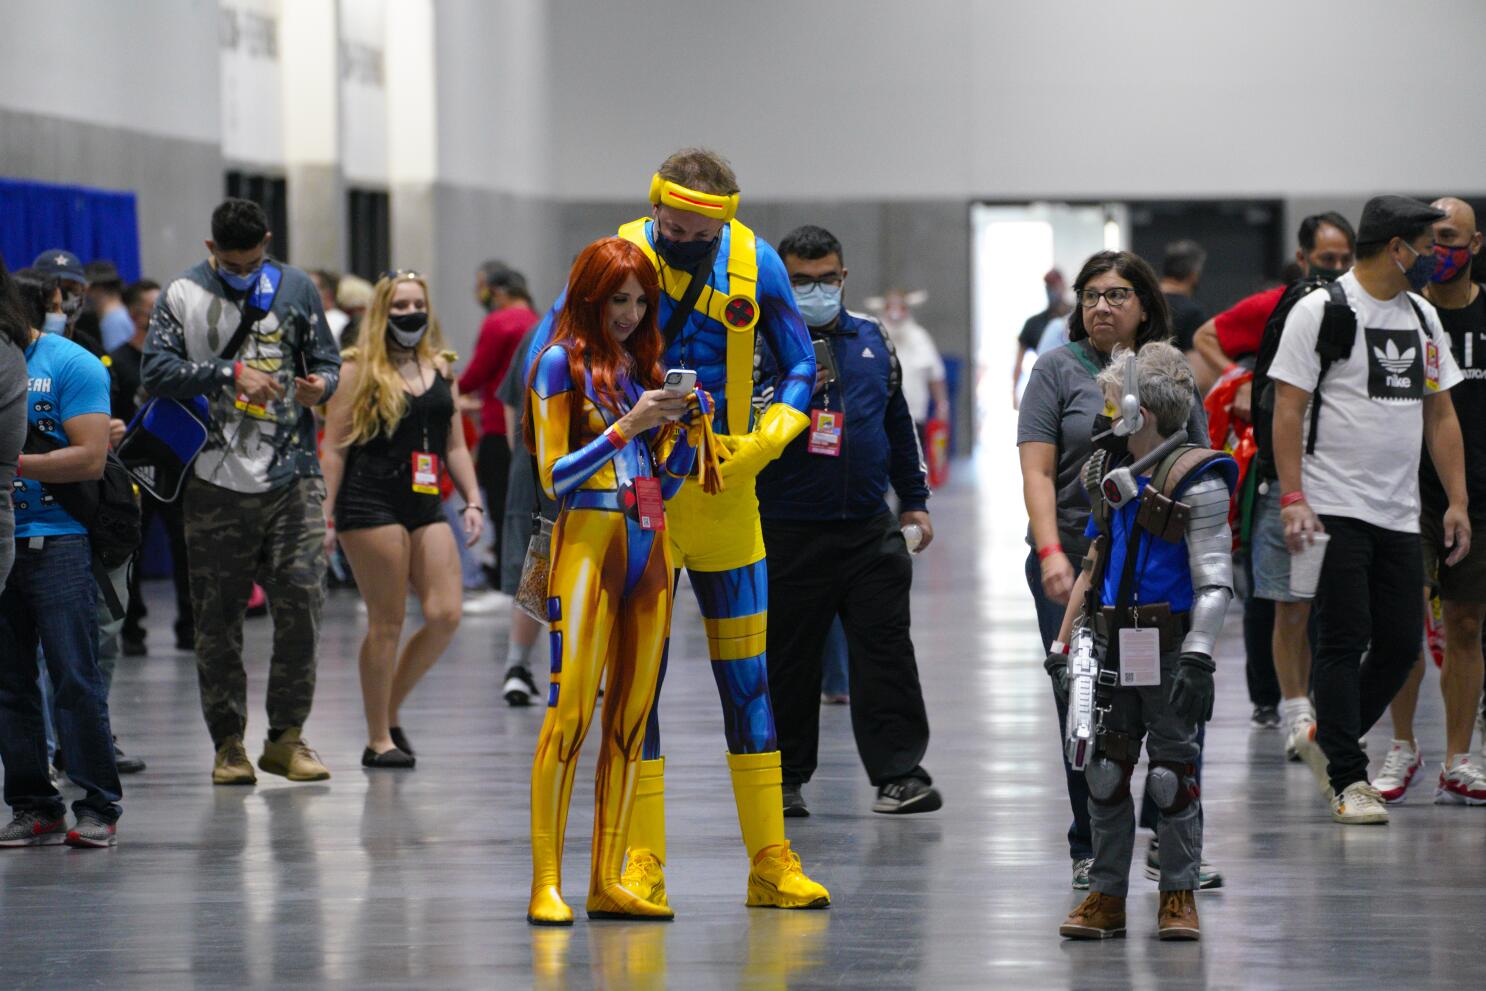 Forget the movie stars. Fandom, cosplay rule at scaled-down San